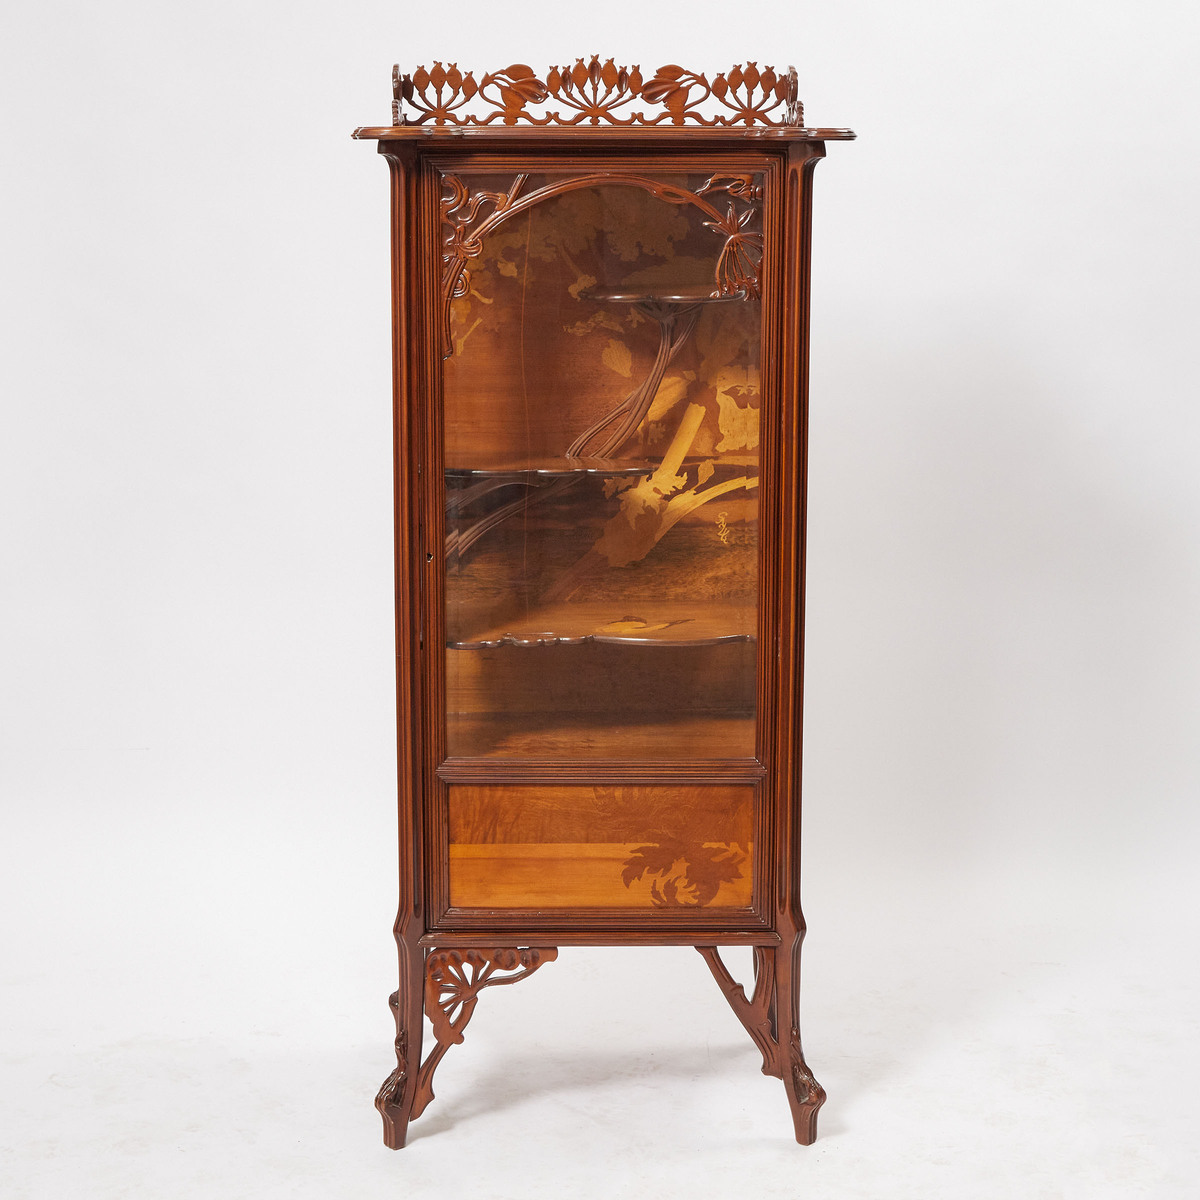 Émile Gallé Carved Walnut and Fruitwood Marquetry Vitrine de Salon, c.1900, 66.5 x 29.5 x 20.25 in — - Image 2 of 3